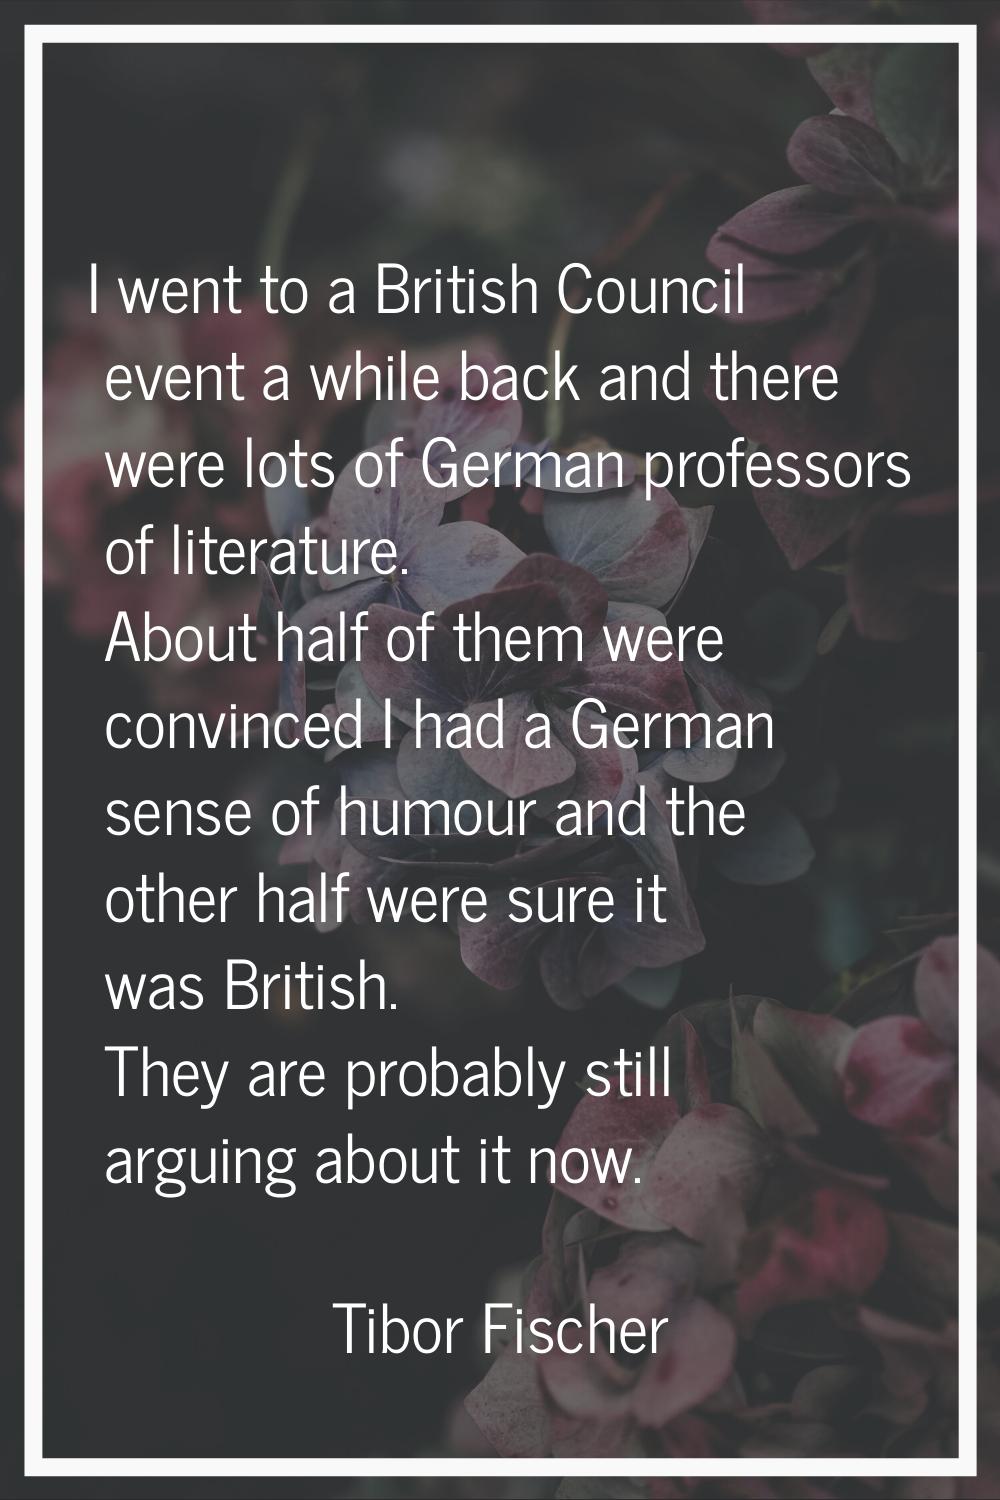 I went to a British Council event a while back and there were lots of German professors of literatu